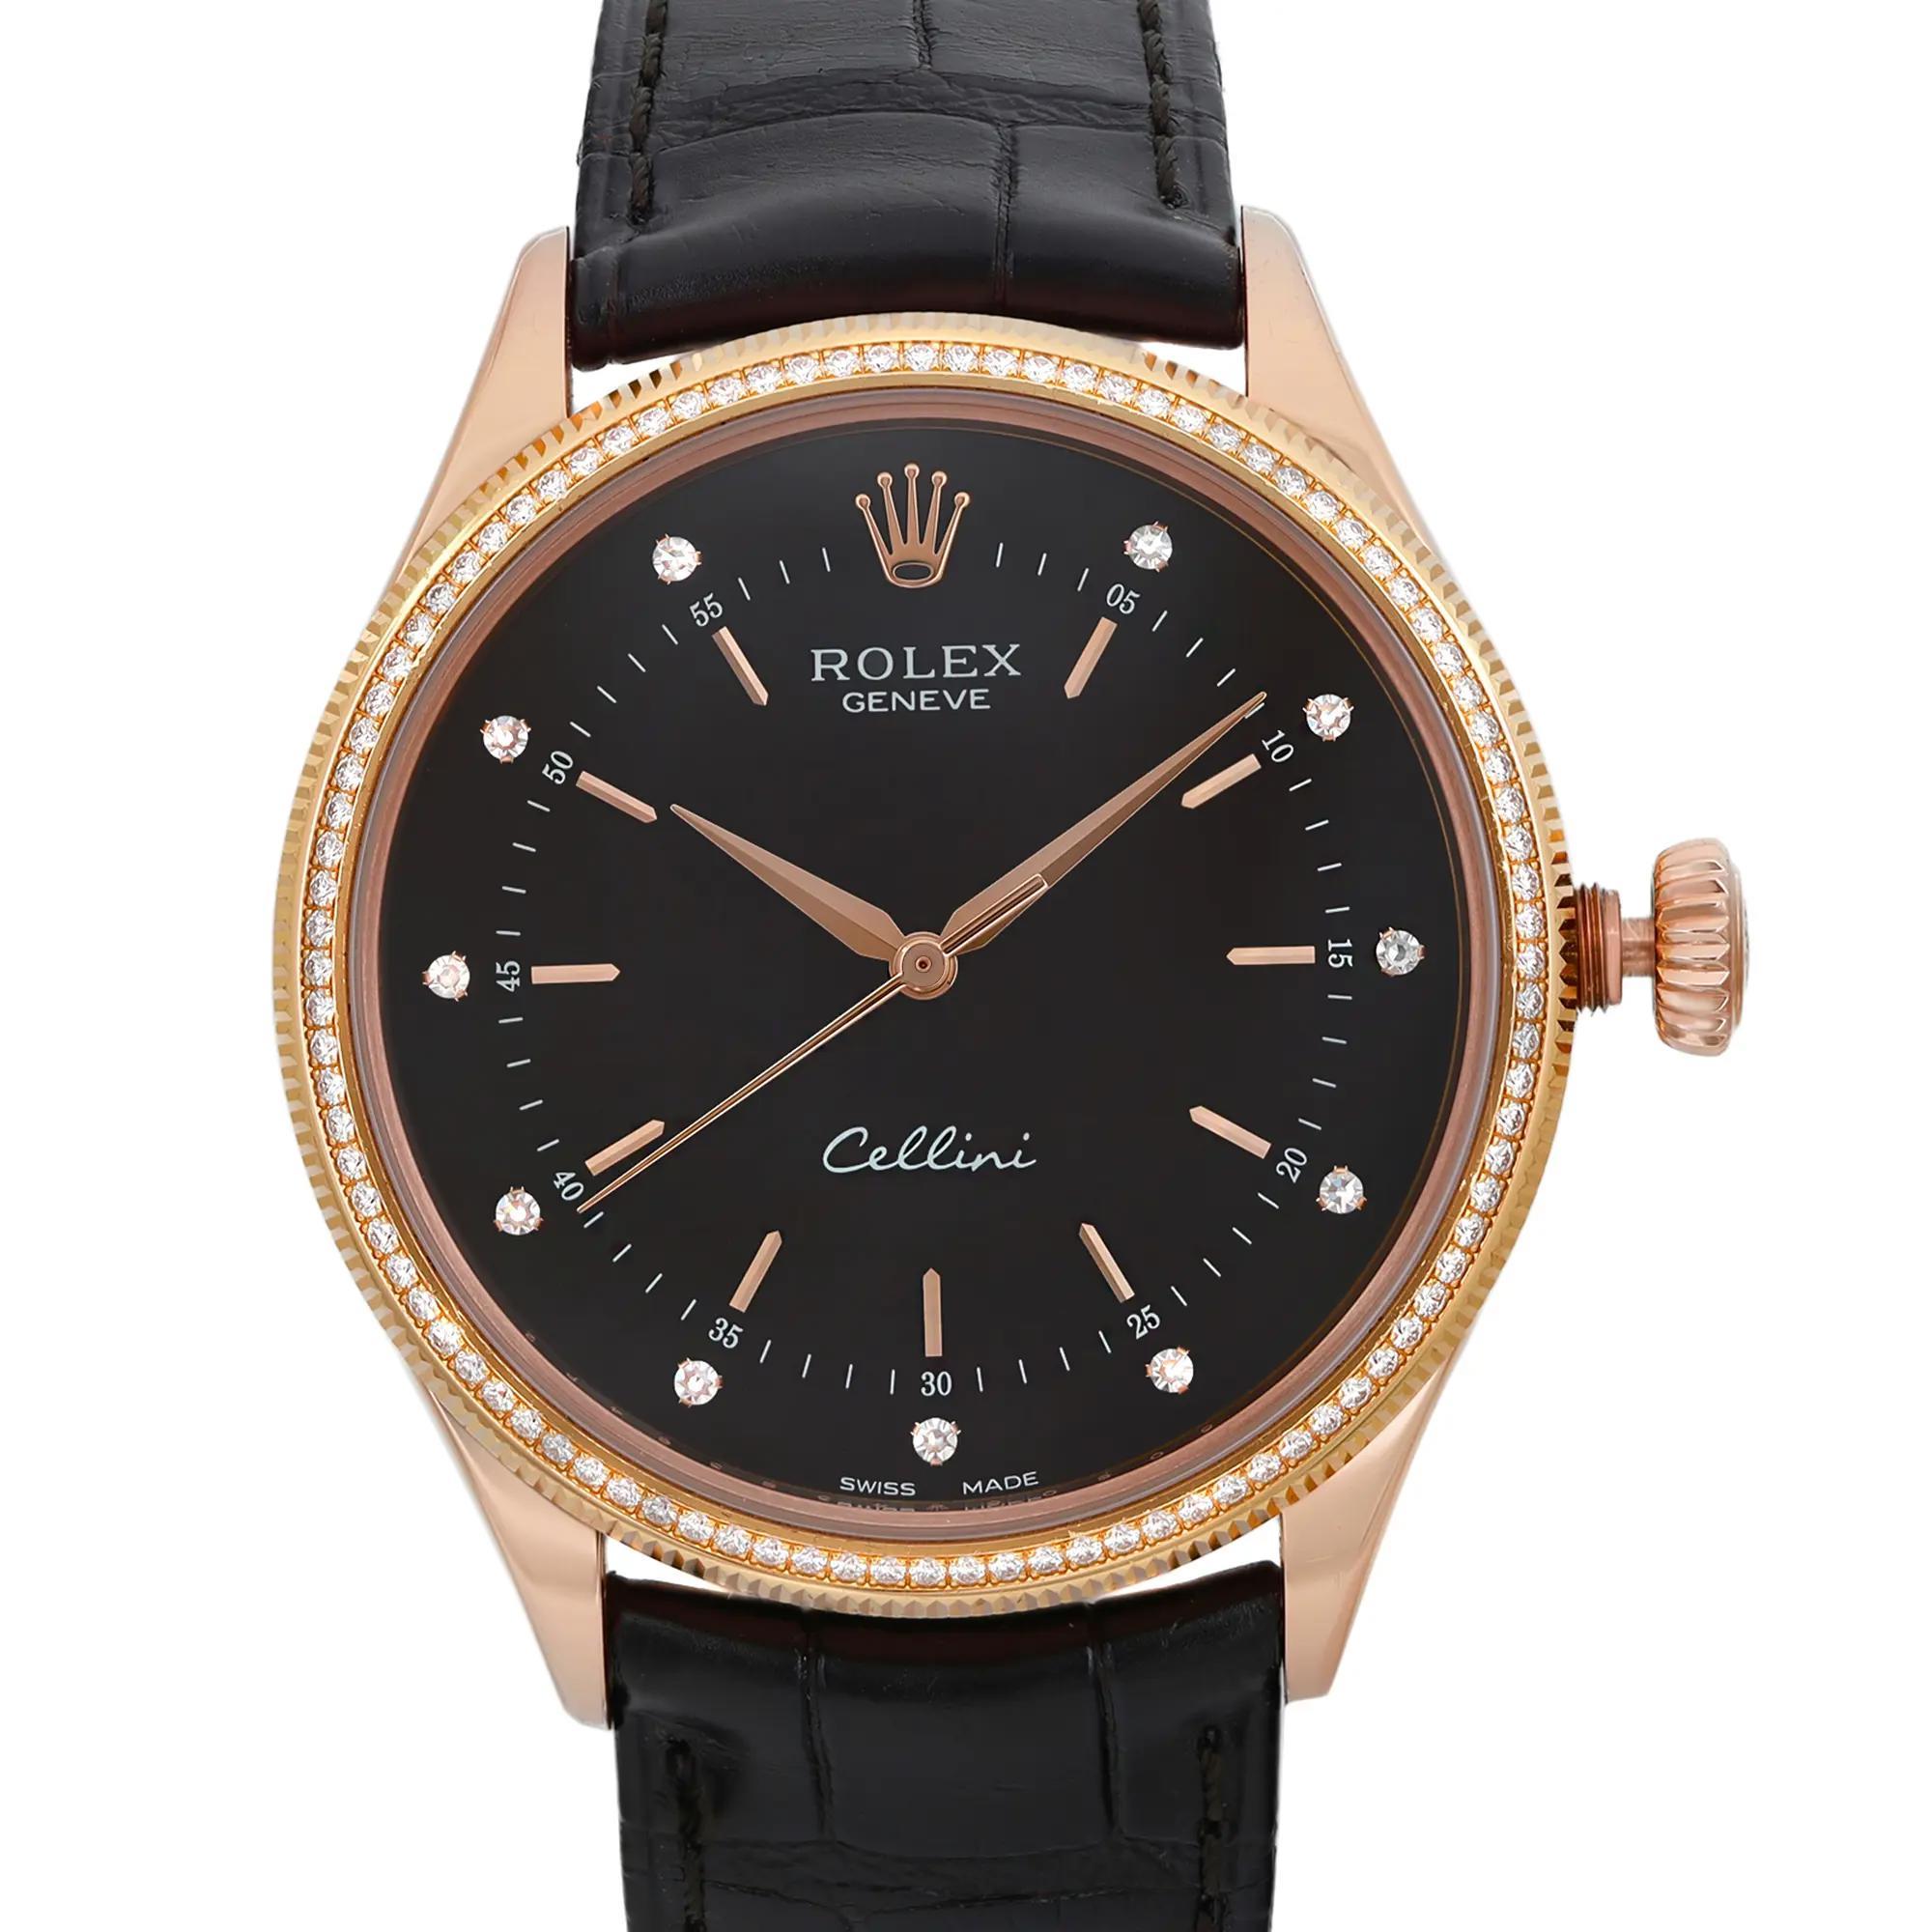 Pre-owned in mint condition. 2018 card. Comes with the original box and papers. Very unique beautiful watch.

General Information

Brand: Rolex
Model: Cellini Time
Model Number: 50605RBR
Type: Wristwatch
Department: Men
Vintage: No
Year